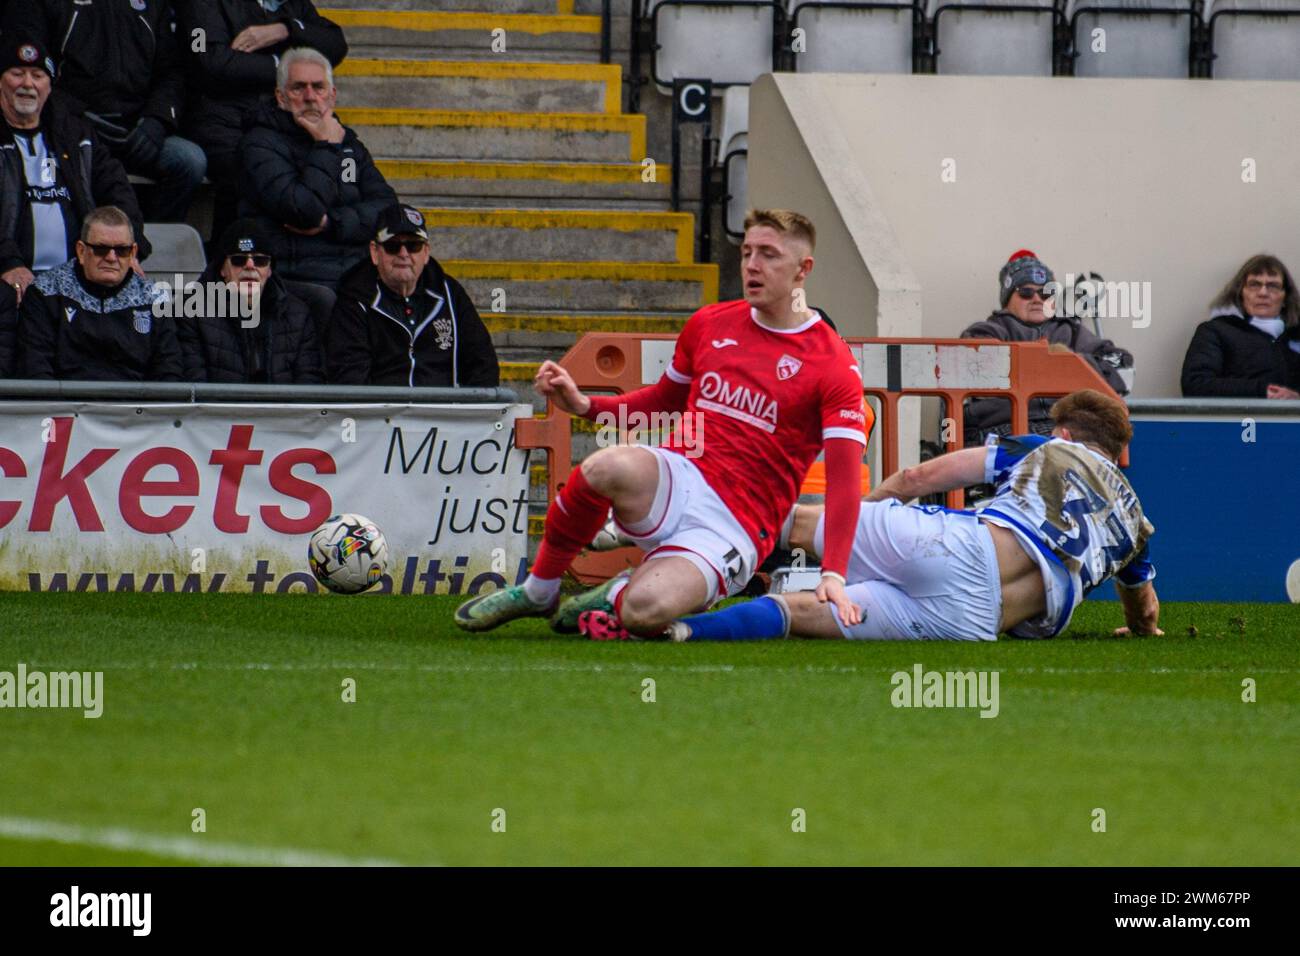 Morecambe on Saturday 24th February 2024. Grimsby Town's Denver Hume tackles Morecambe's Joel Senior during the Sky Bet League 2 match between Morecambe and Grimsby Town at the Globe Arena, Morecambe on Saturday 24th February 2024. (Photo: Ian Charles | MI News) Credit: MI News & Sport /Alamy Live News Stock Photo